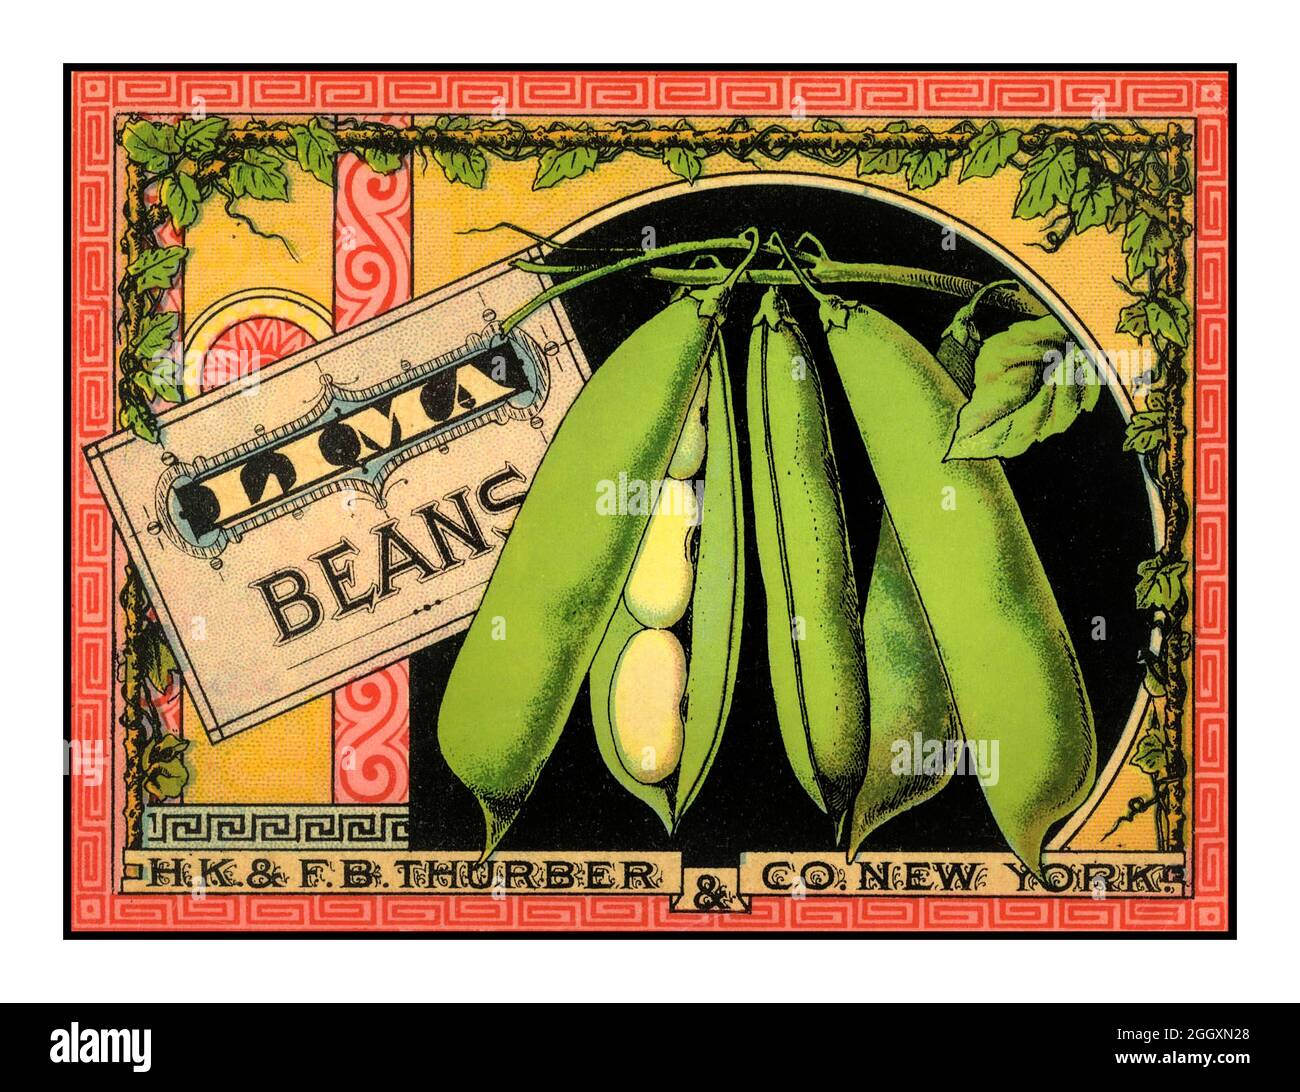 LIMA BEANS BUTTER BEANS Vintage 1900s Poster advertising for LIMA Beans by HK & FB Thurber & Co New York USA Lima bean (Phaseolus lunatus) also commonly known as the butter bean sieva bean,double bean,Madagascar bean, chad bean, or wax bean is a legume grown for its edible seeds or beans. Stock Photo